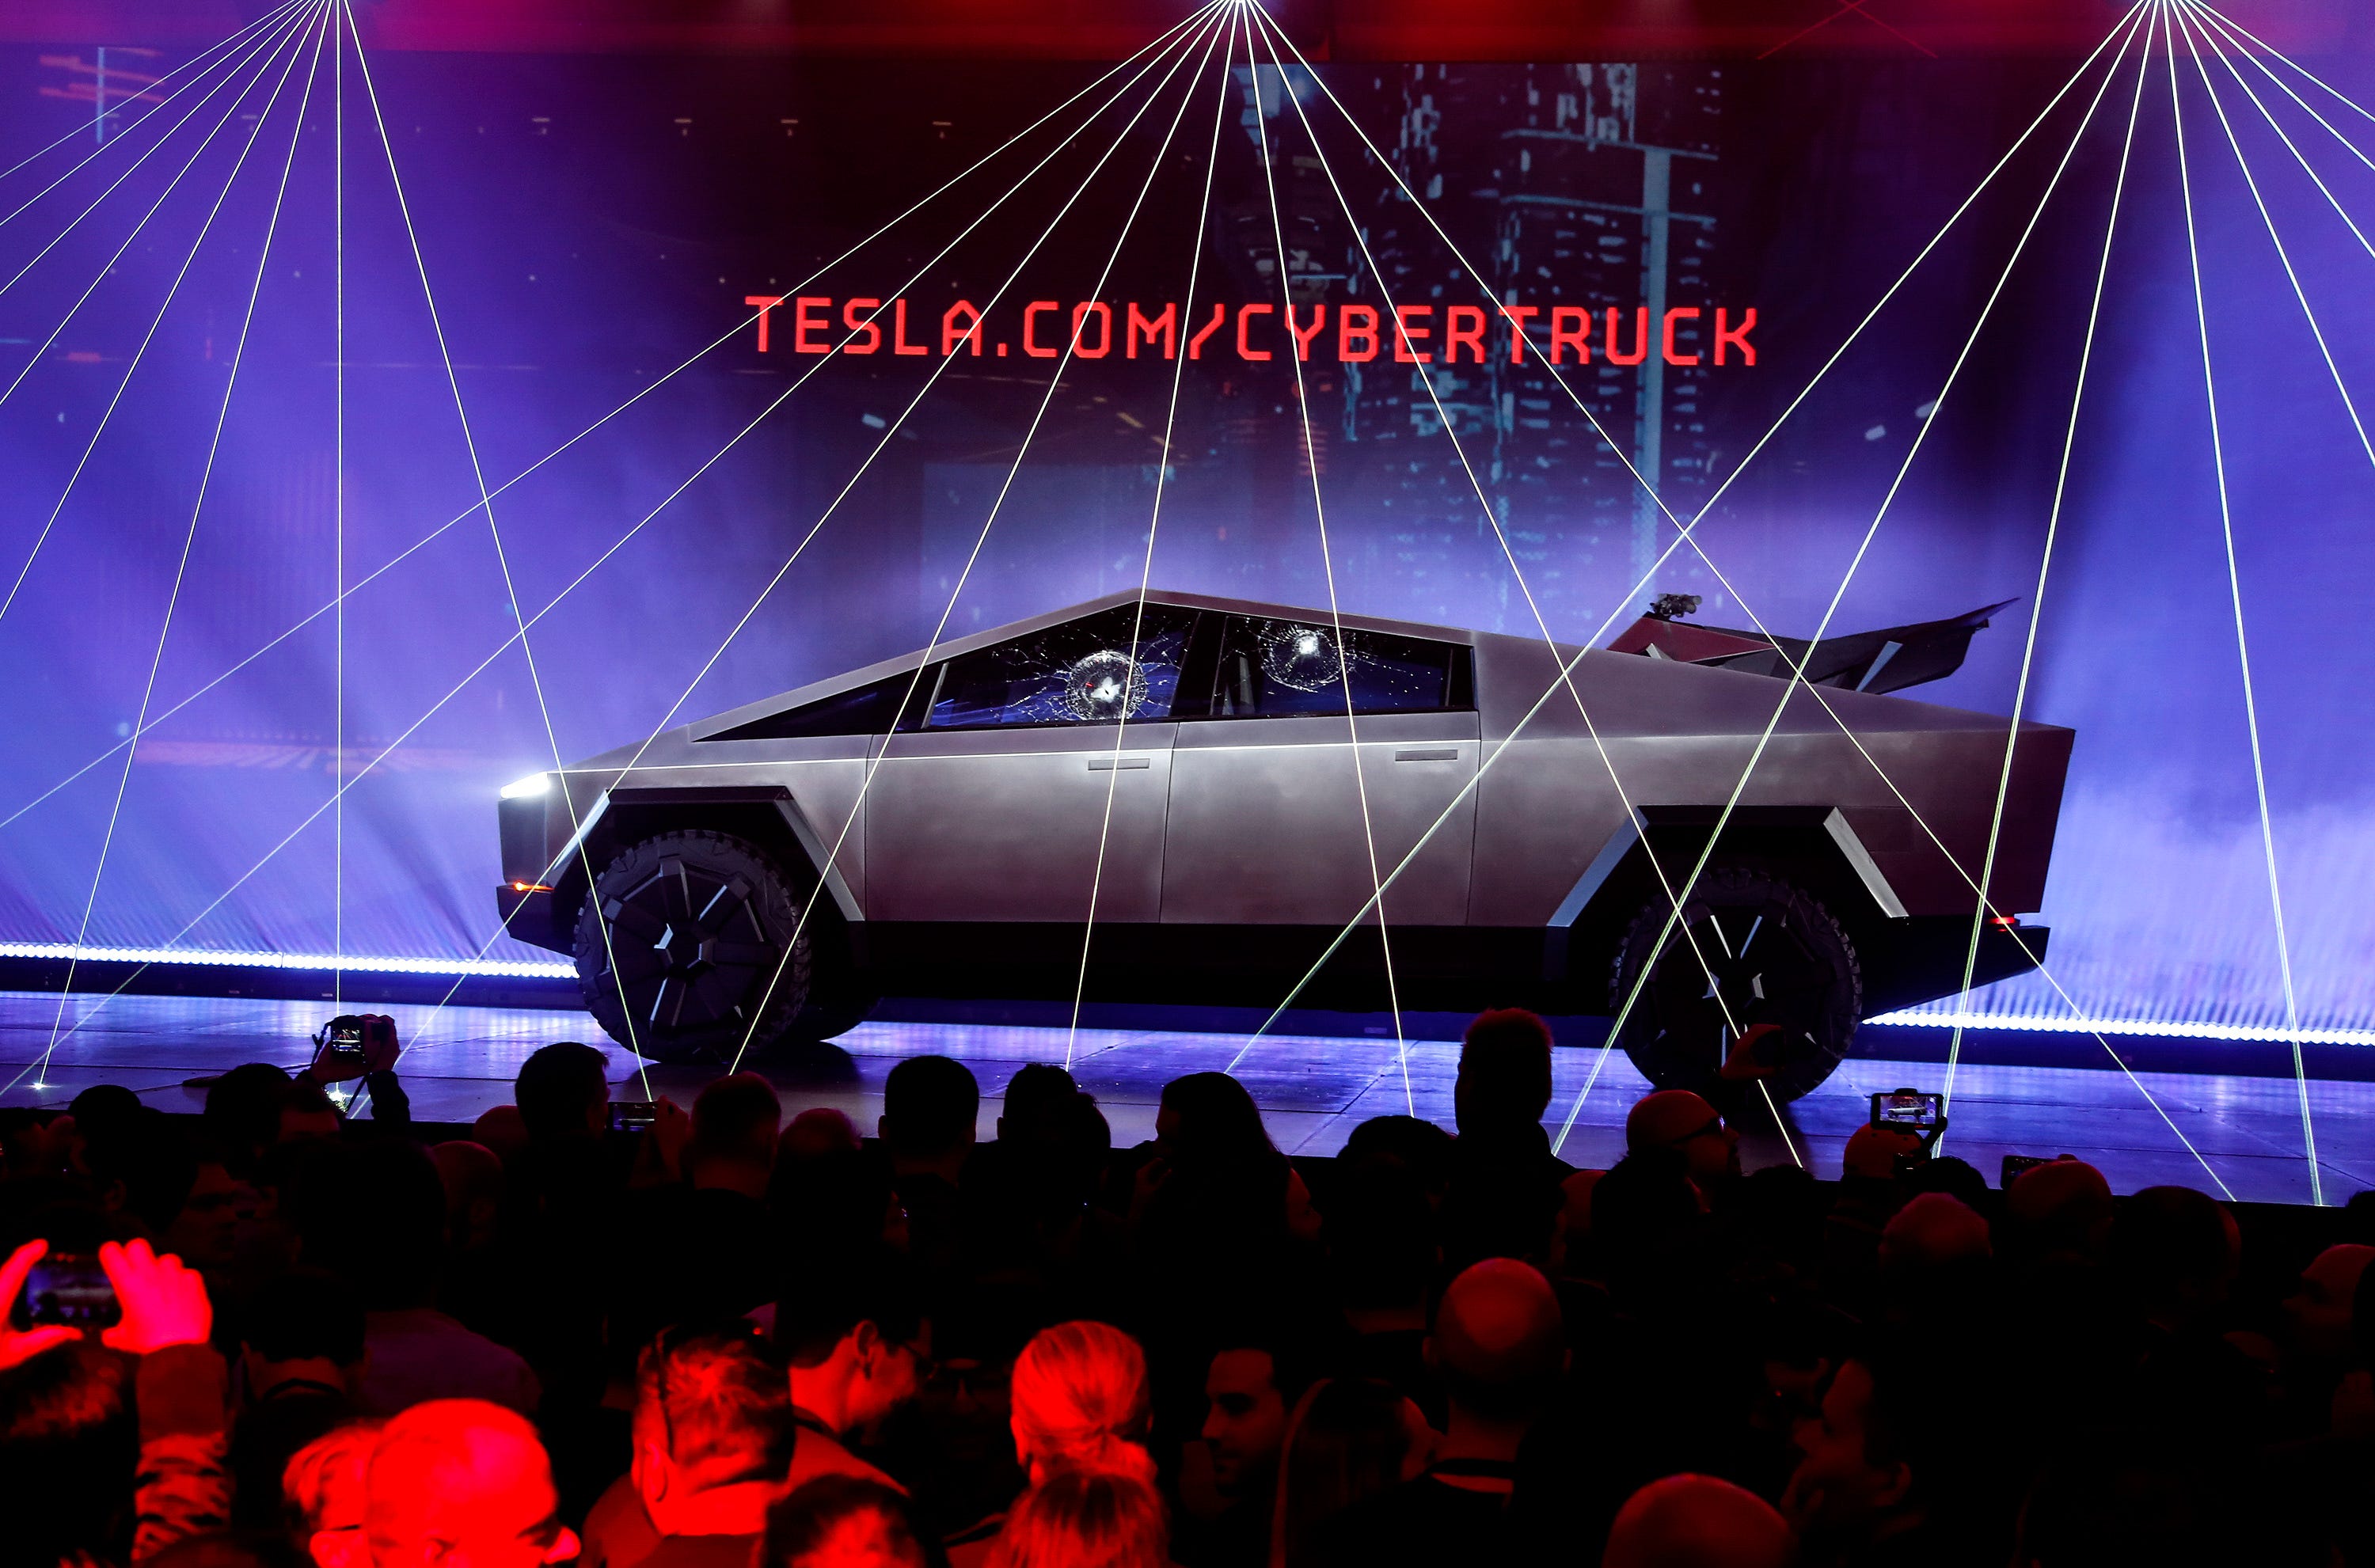 The Tesla Cybertruck that debuted in November is one of five electric pickup trucks scheduled to go on sale in the next two years.